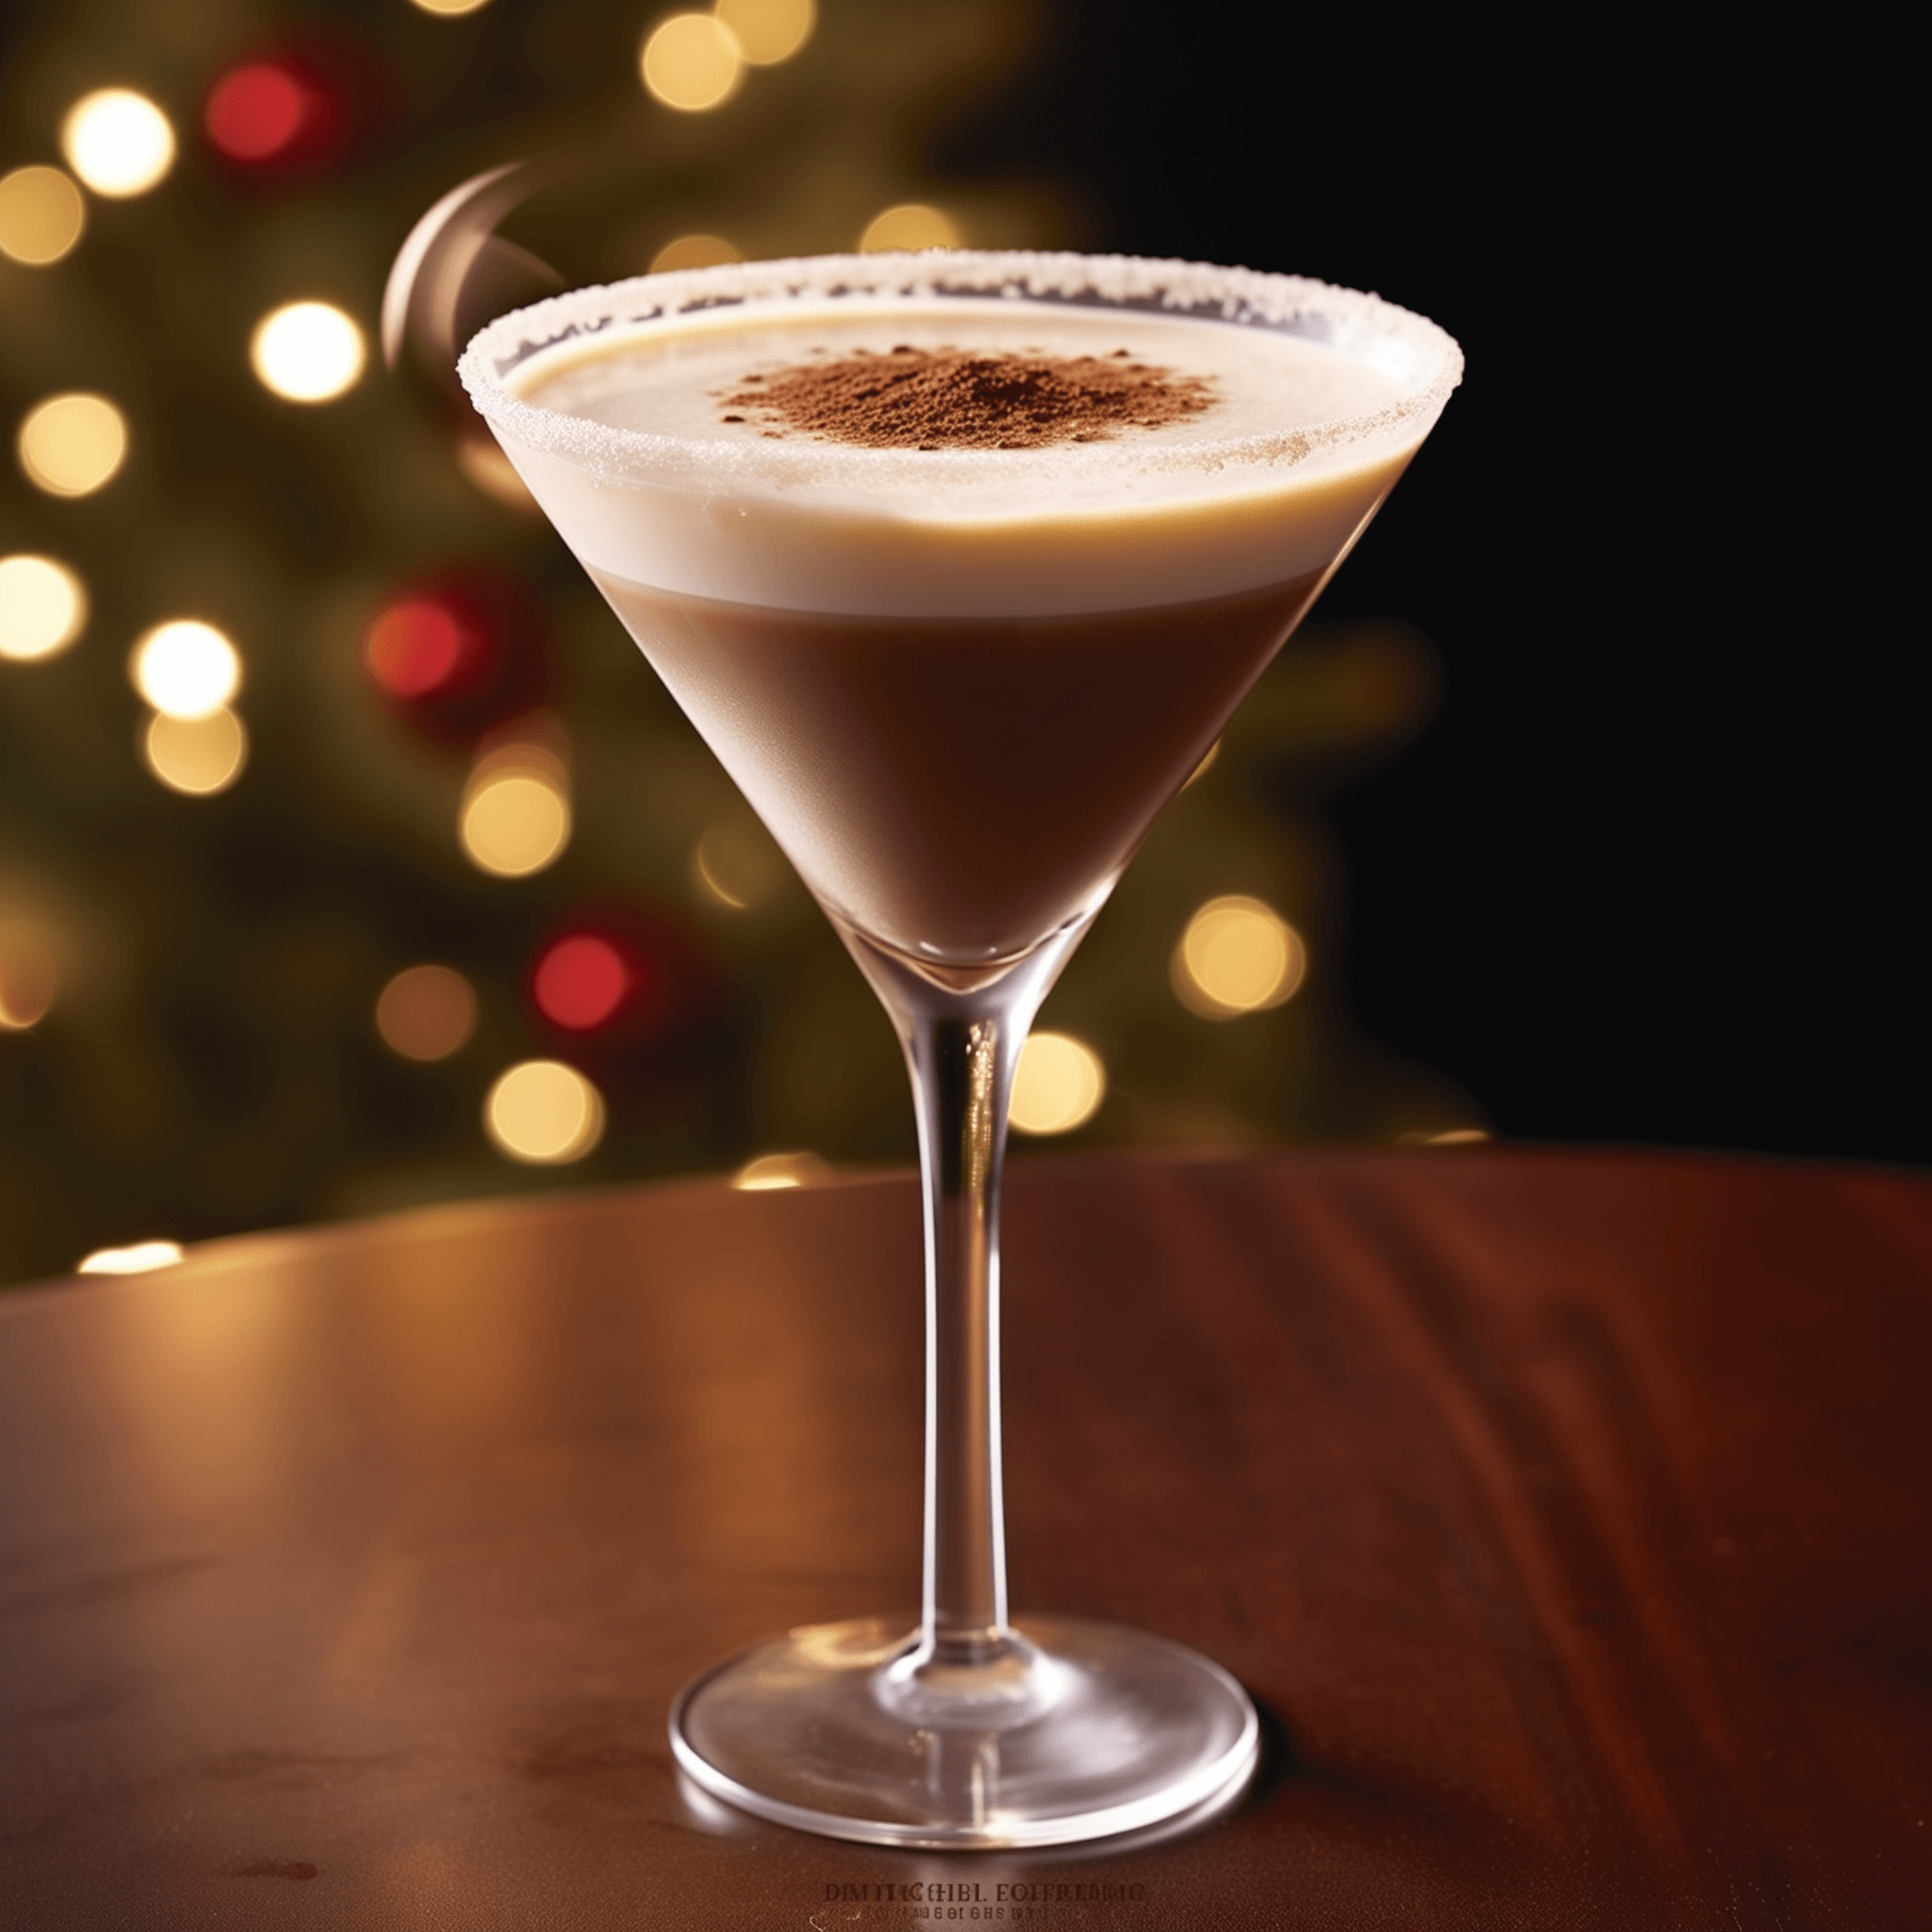 Eggnog Espresso Martini Cocktail Recipe - The Eggnog Espresso Martini is a delightful balance of creamy, sweet, and robust flavors. The eggnog provides a velvety texture and rich, spiced undertones, while the espresso delivers a strong coffee punch. The vodka adds a clean, alcoholic warmth without overpowering the other ingredients.